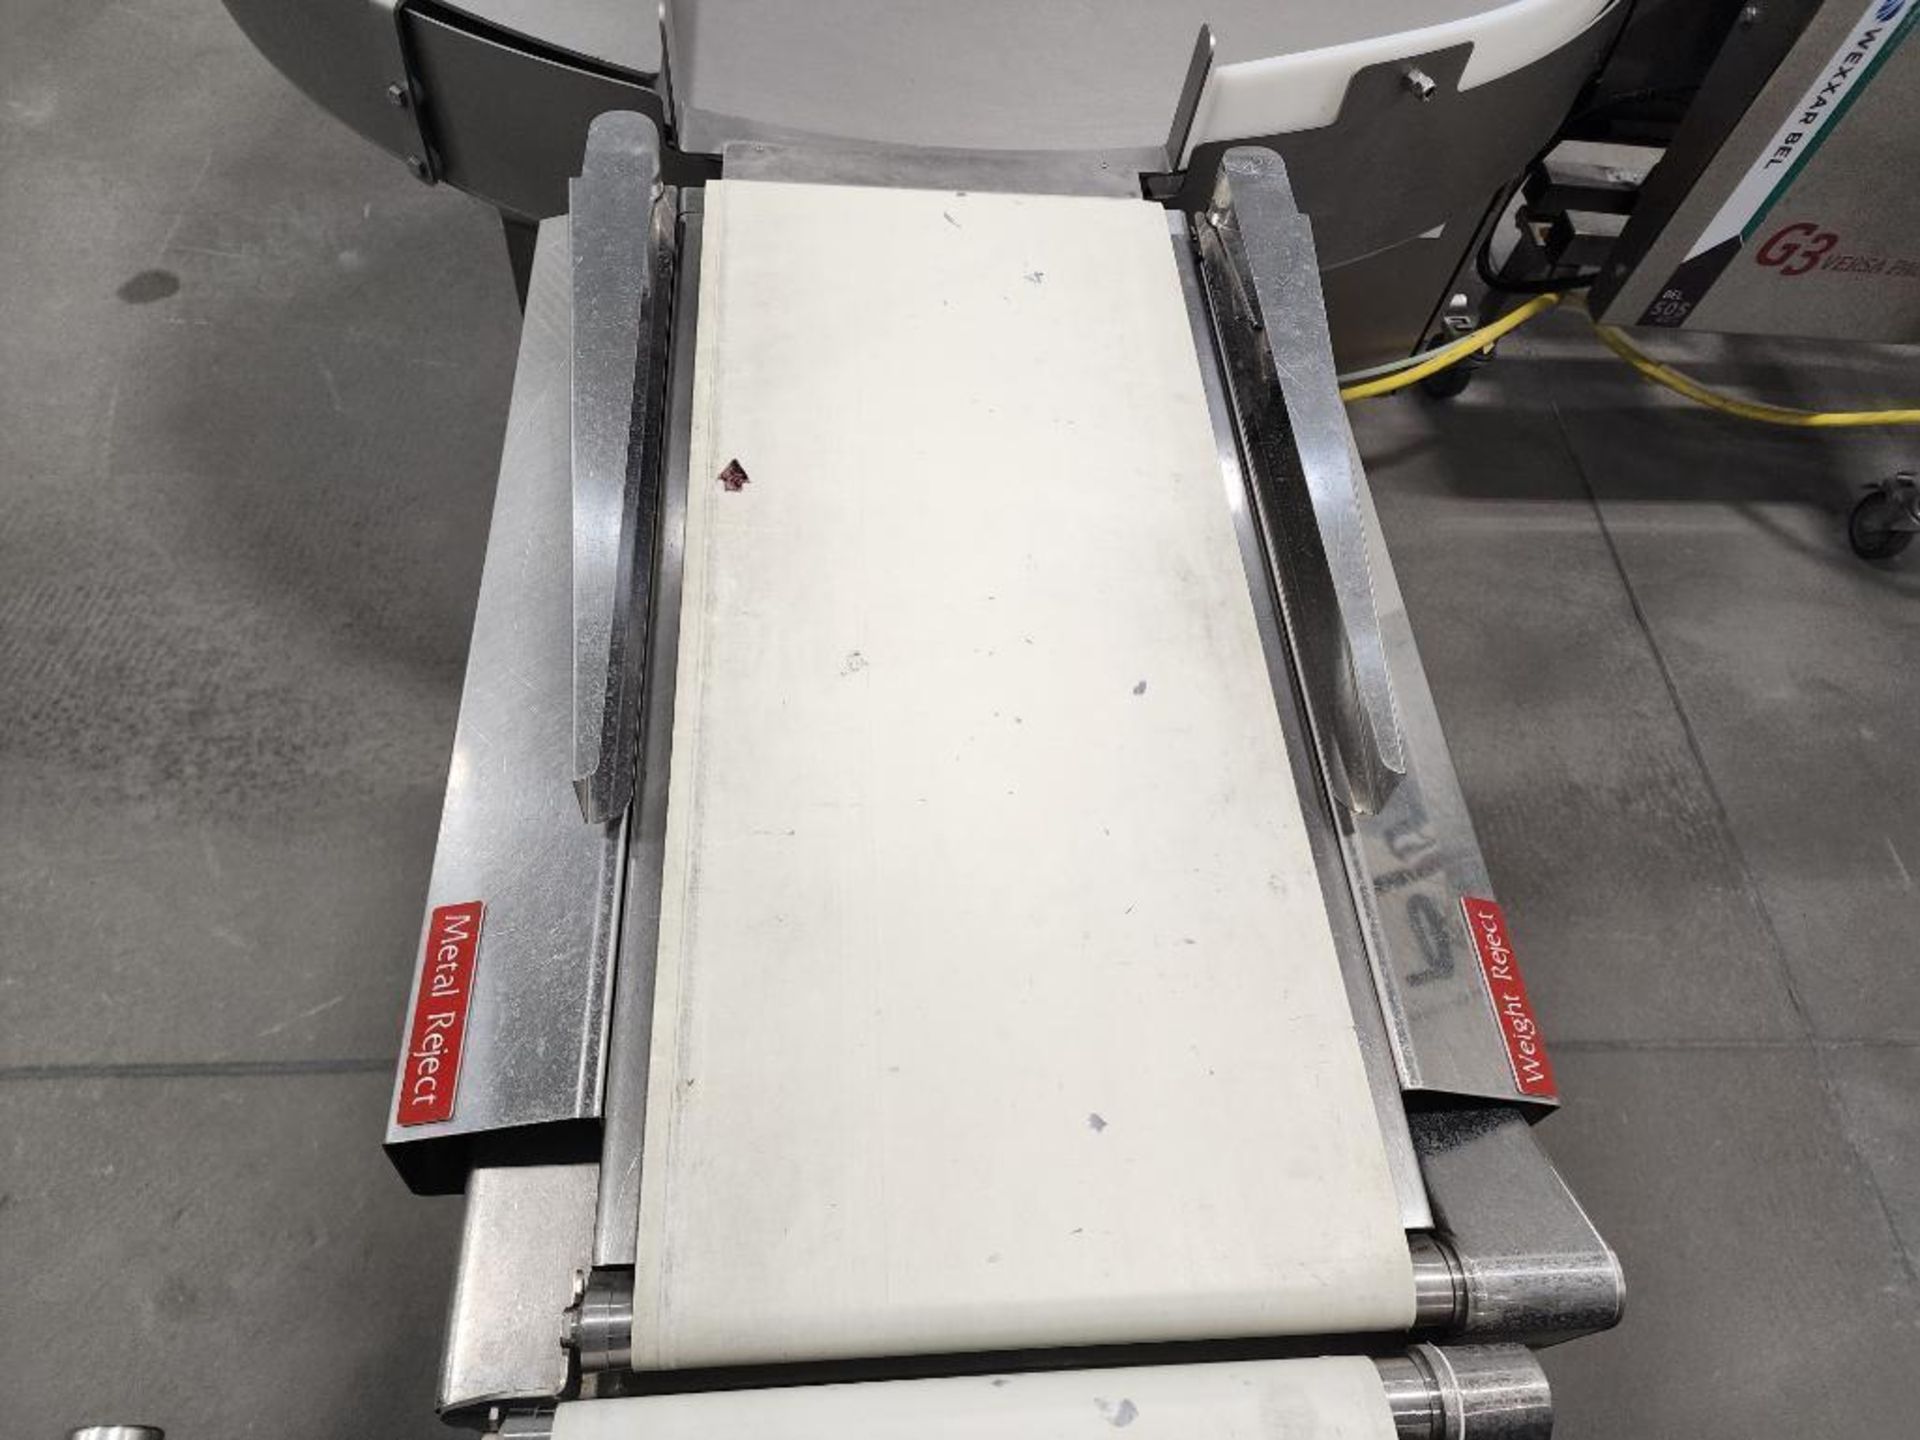 Ceia Metal Detector/Check Weigh Combo - Image 10 of 13